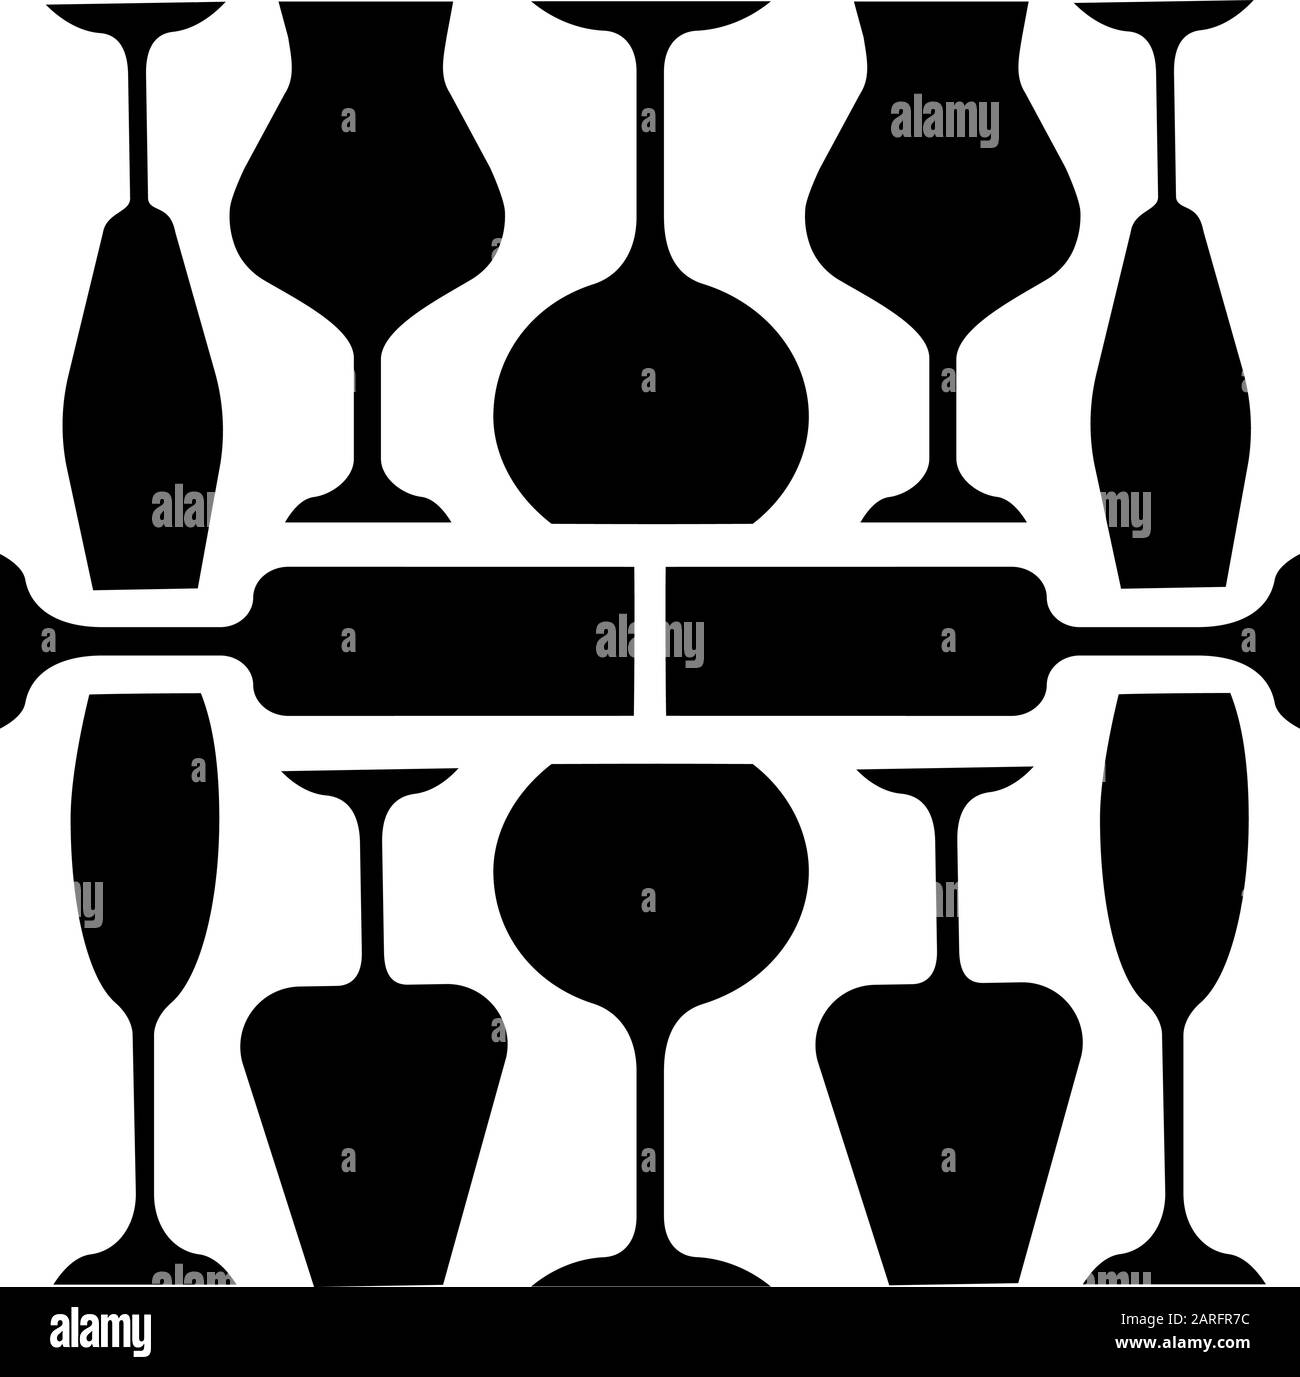 Wineglasses glyph icon. Restaurant service. Alcohol bar. Port and madeira glasses. Alcoholic beverages glassware. Silhouette symbol. Negative space. V Stock Vector